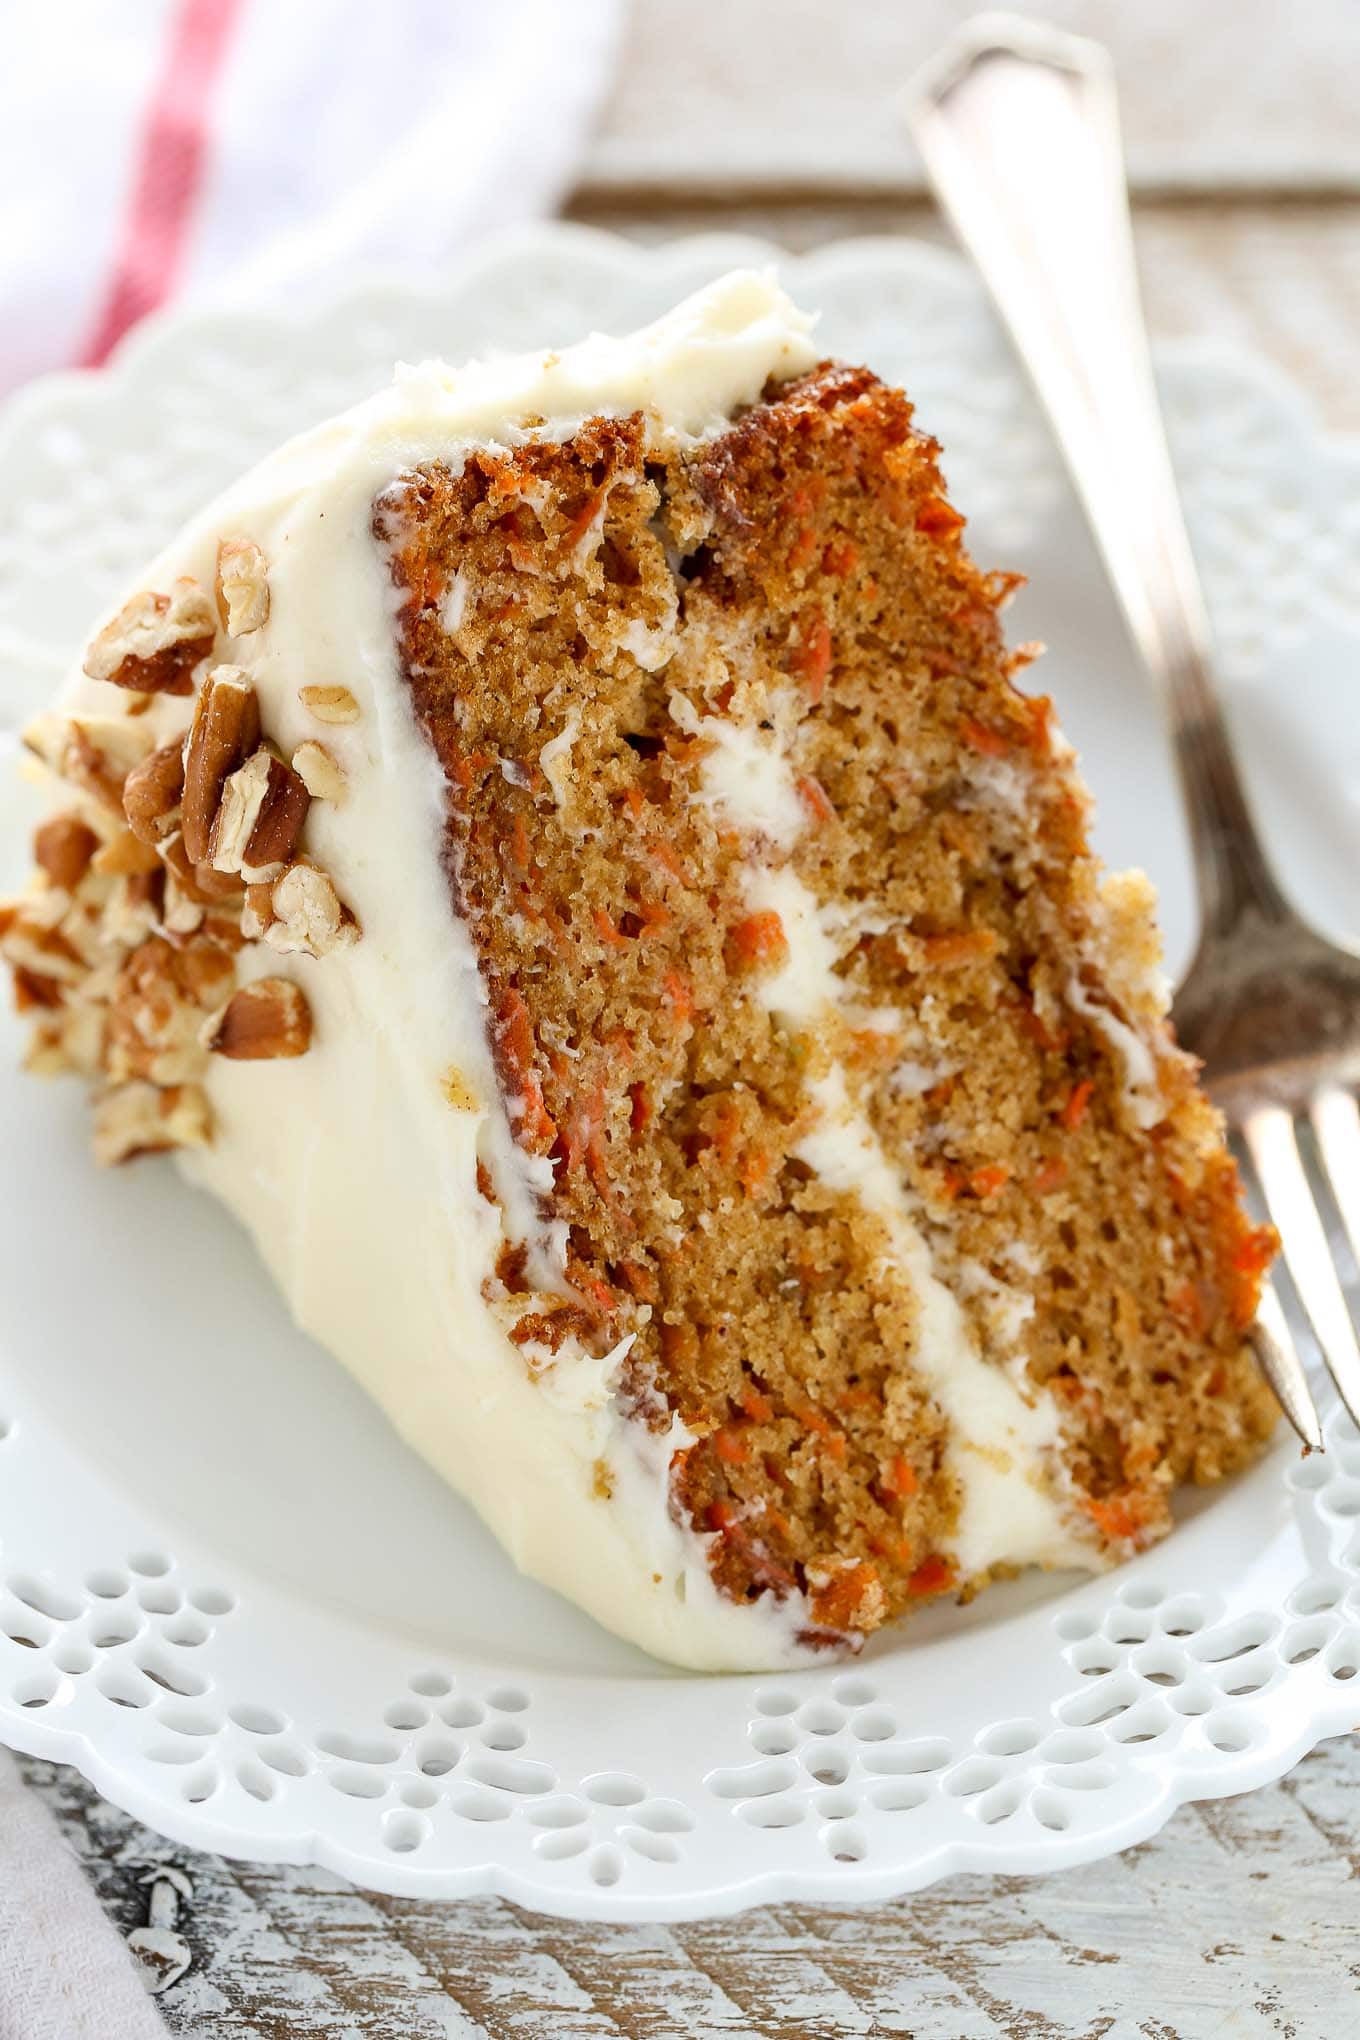 A close up of a slice of carrot cake on a decorative white plate.